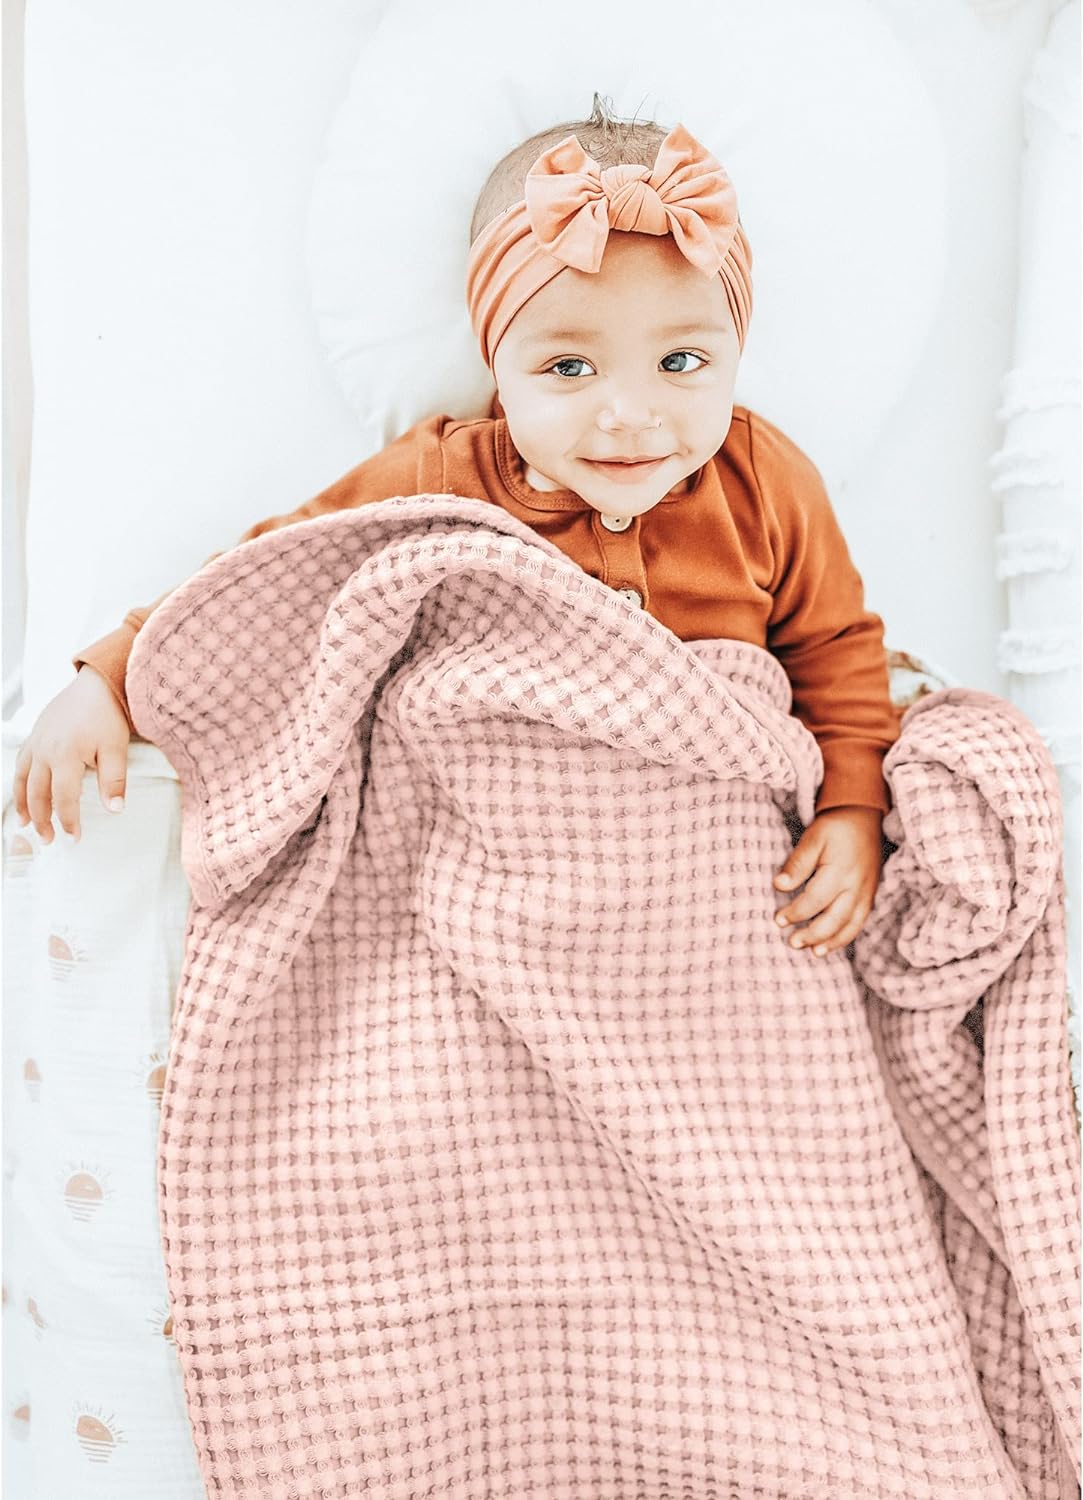 Konssy Waffle Baby Blankets, Nursery Blankets for Boys Girls, Swaddle Blankets Neutral Soft Lightweight Toddler and Kids Throw Blankets(Blush Pink)